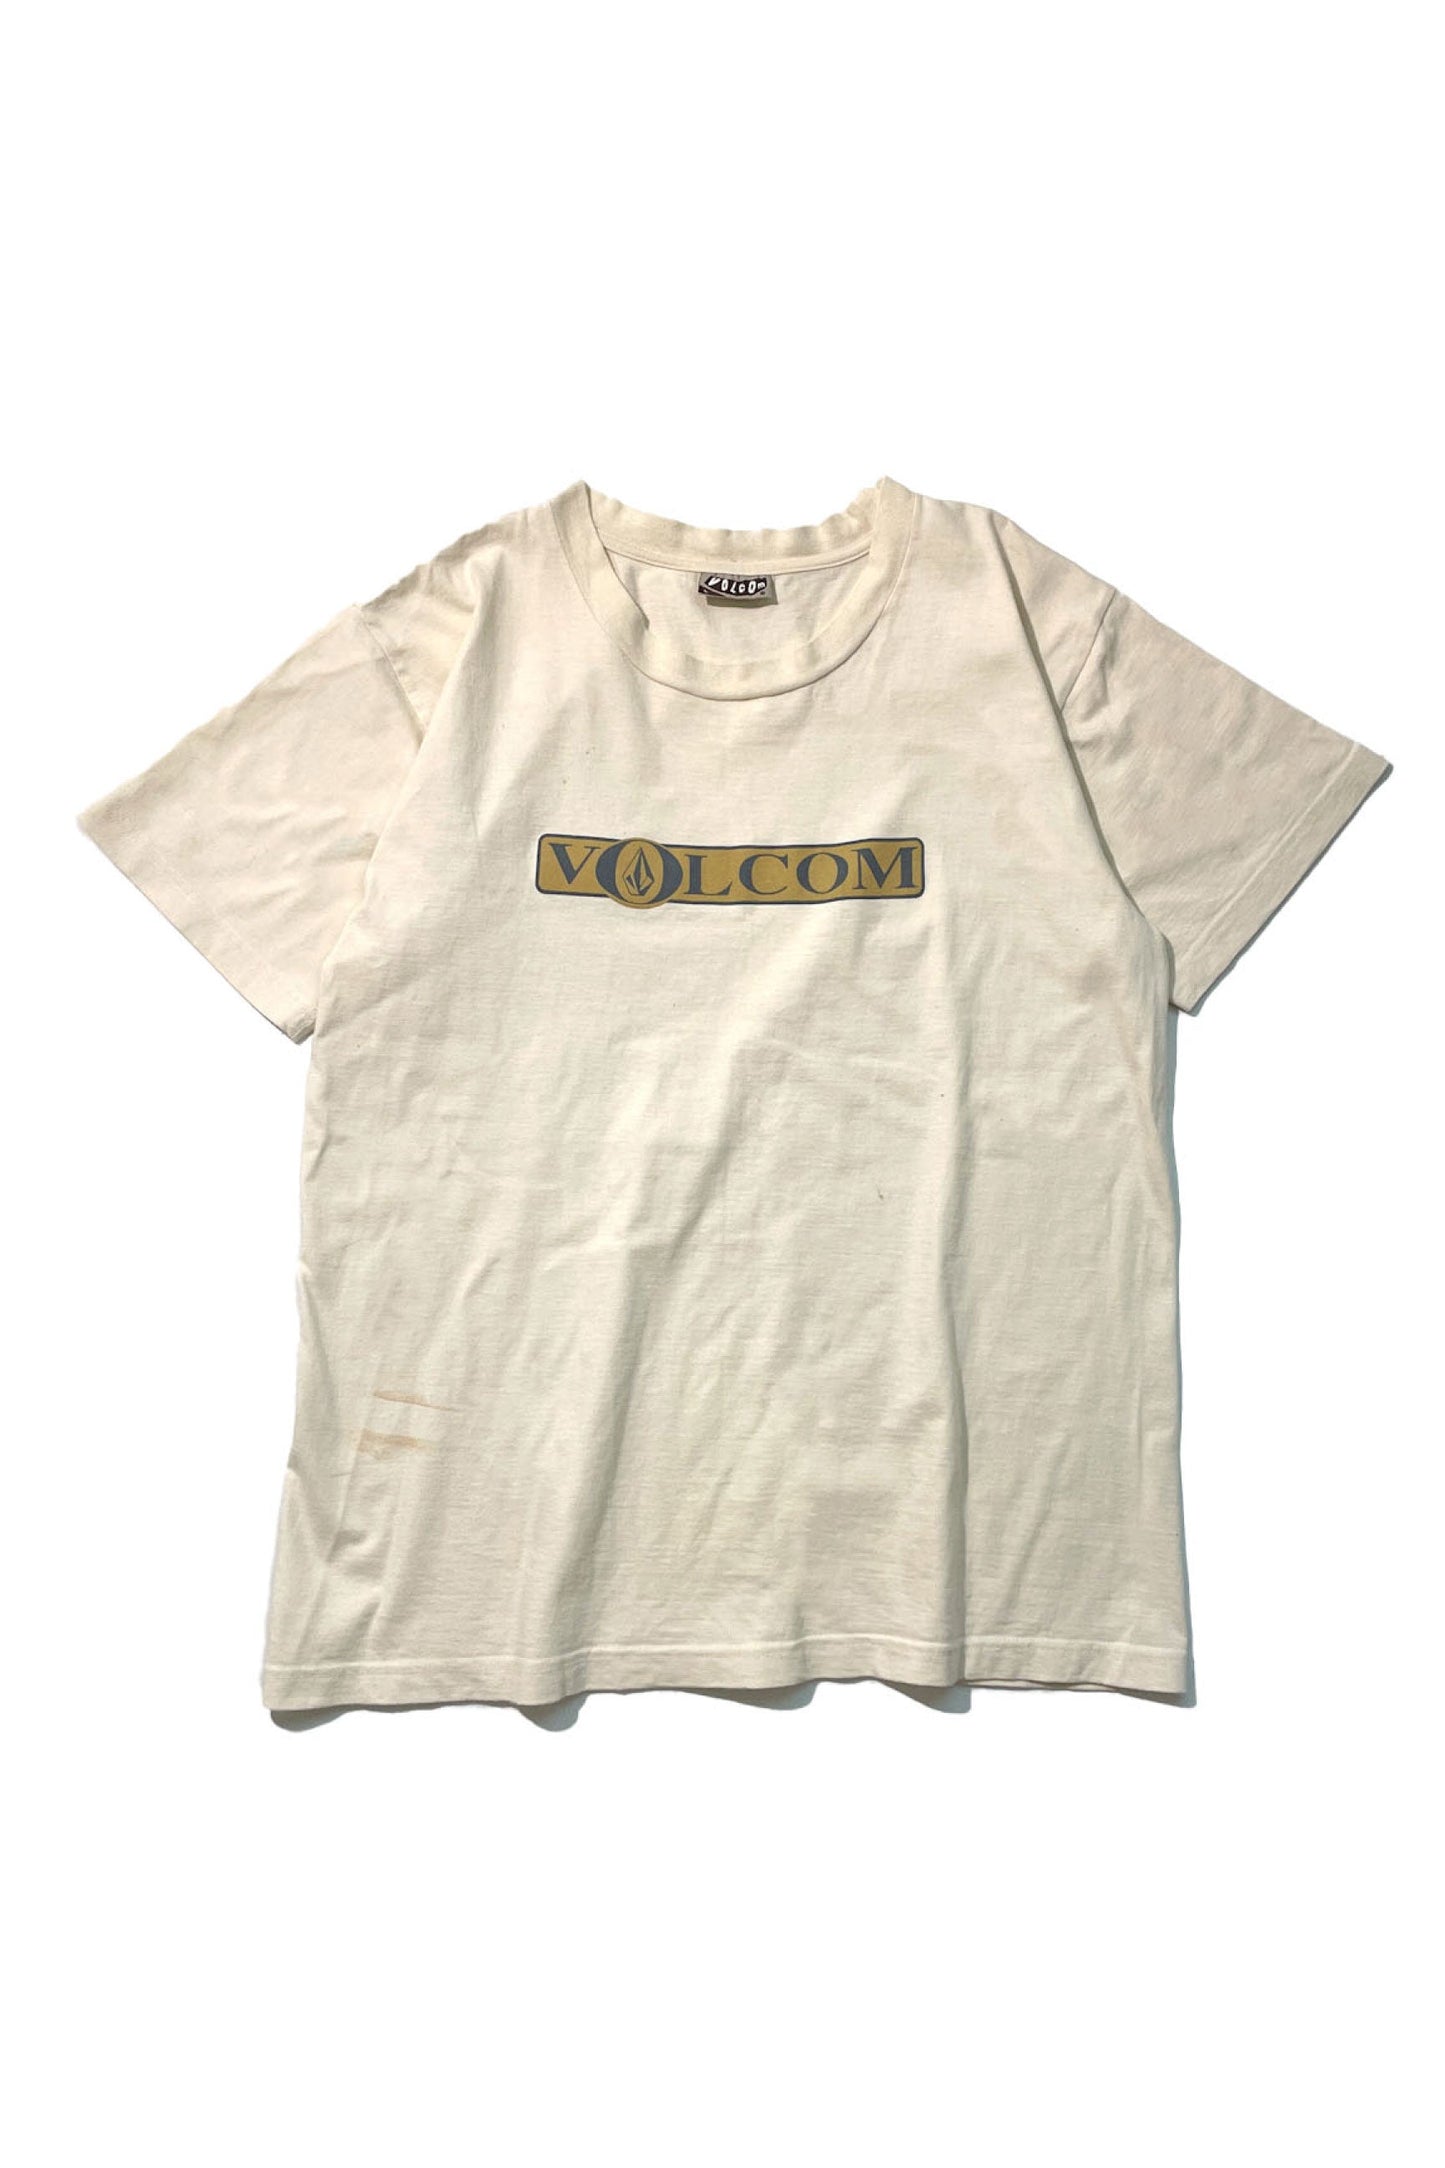 90's Made in USA VOLCOM T-shirt